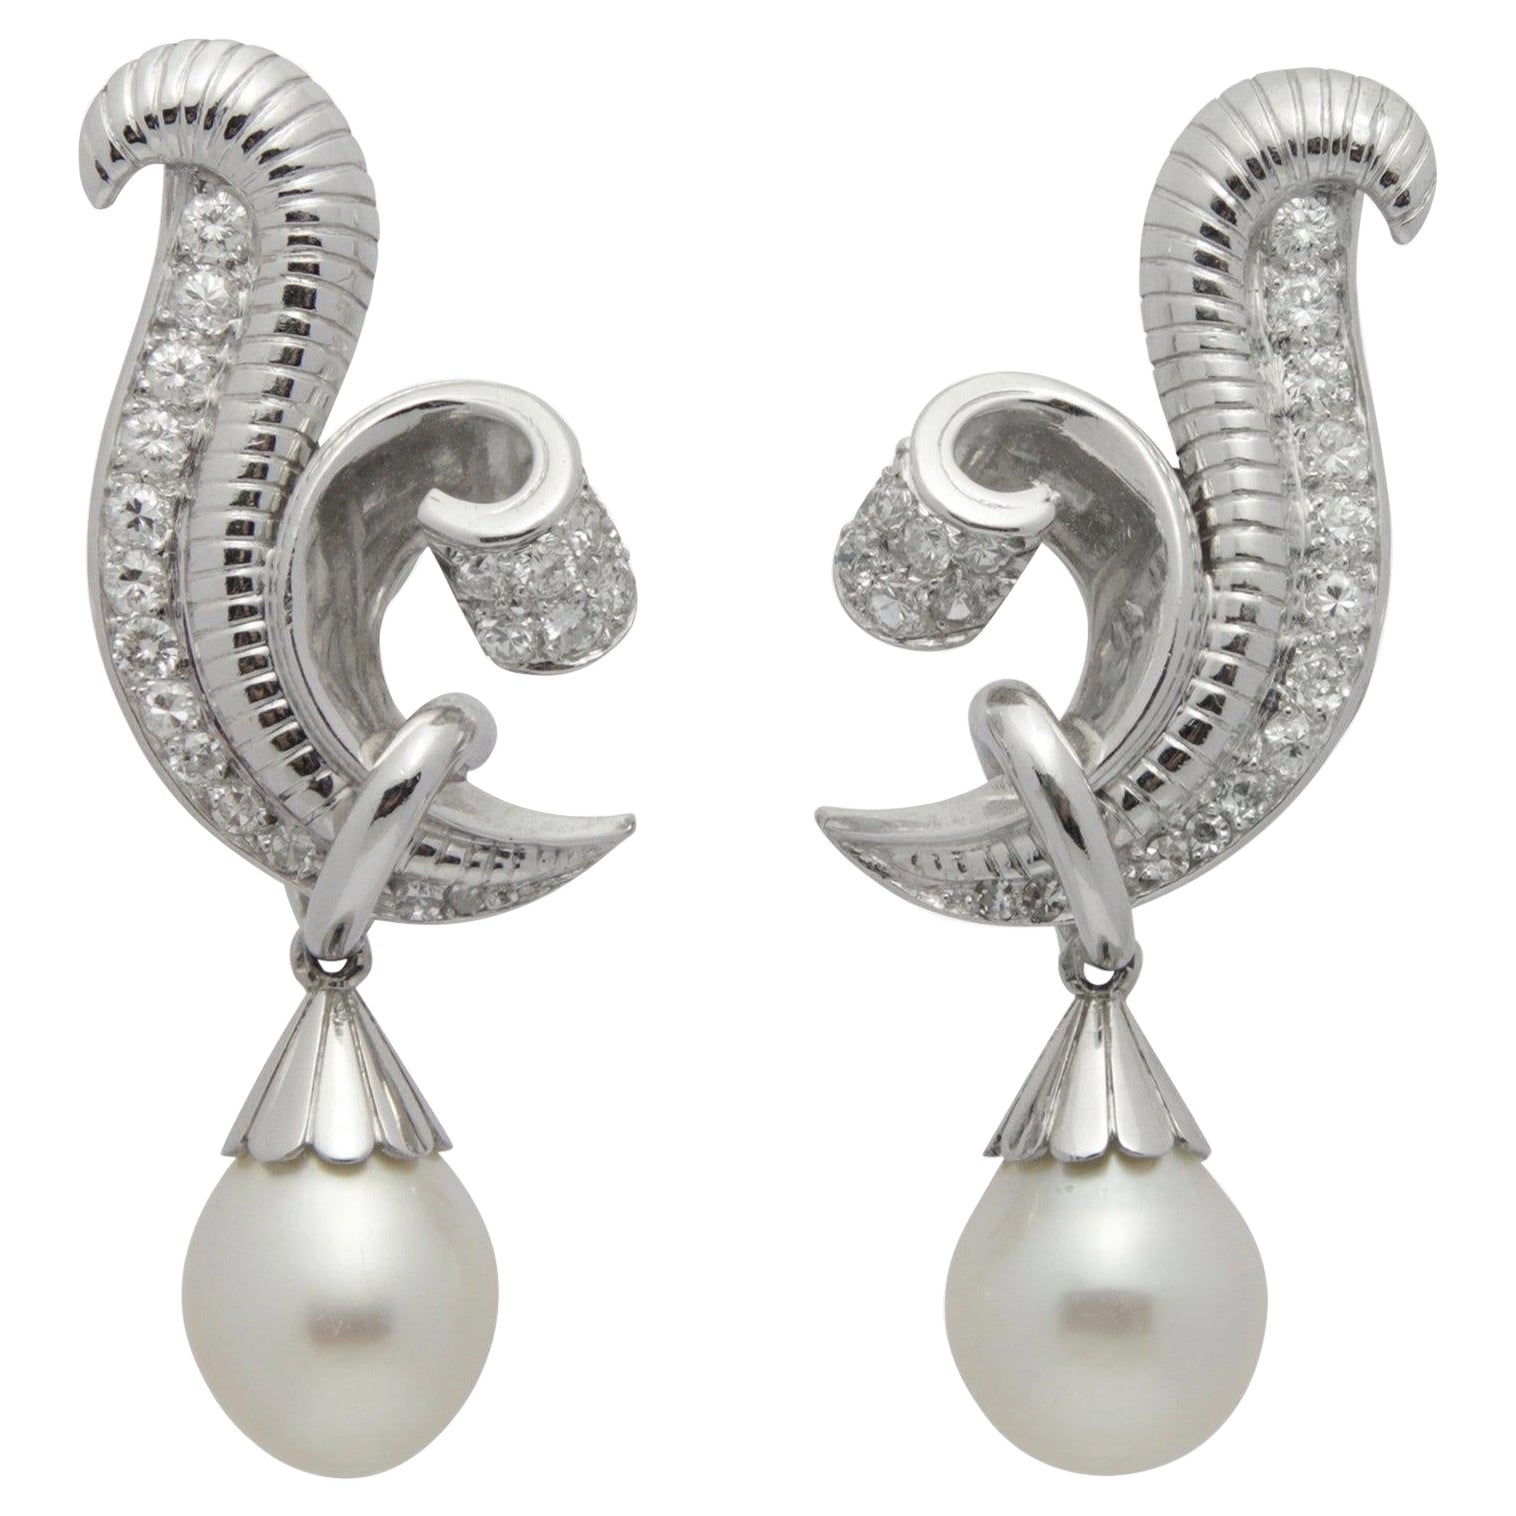 French Retro Period Platinum, Pearl, and Diamond Drop Earrings